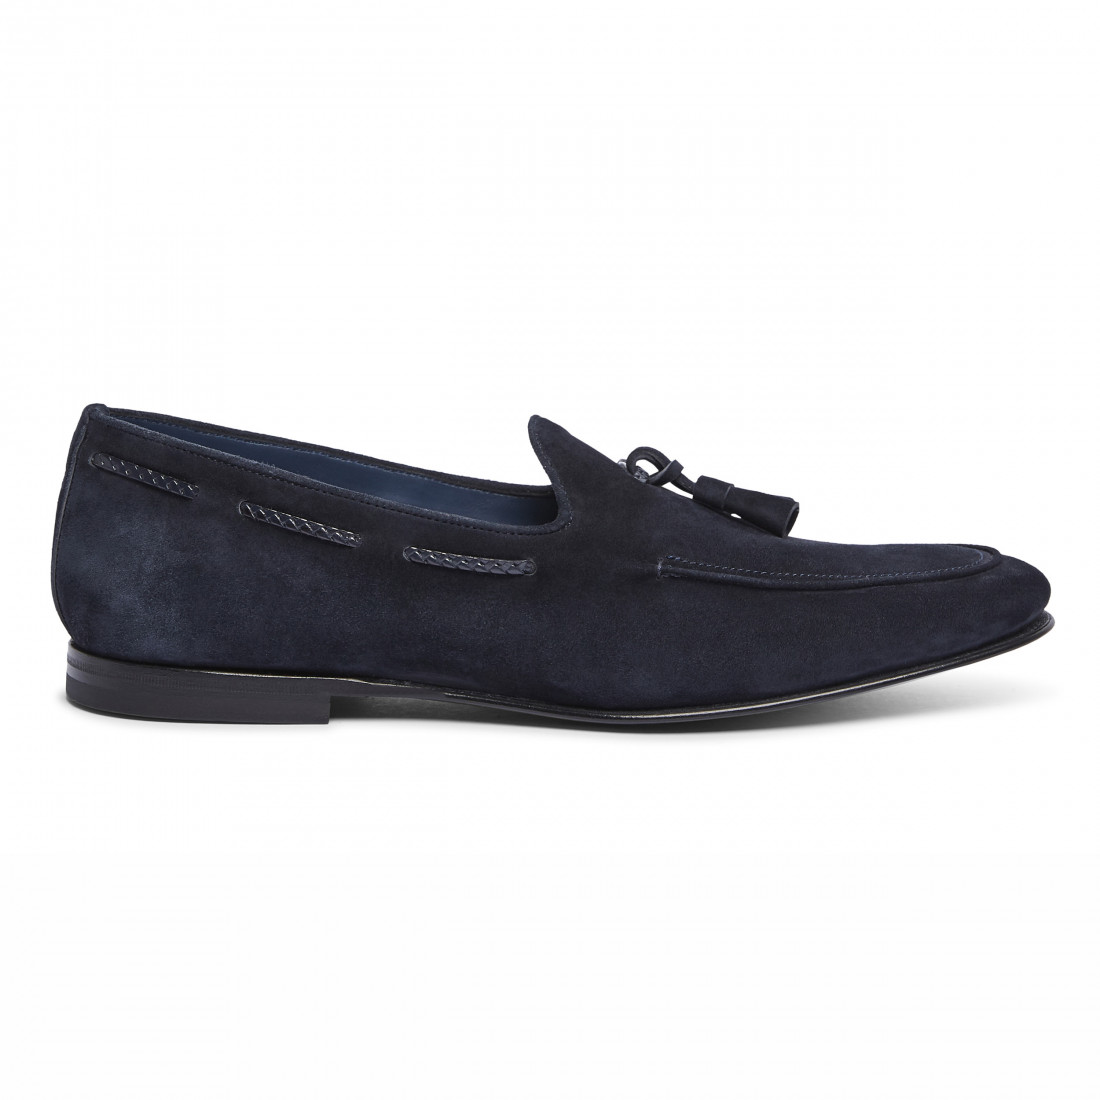 Men's Sangiorgio loafers in blue waxed suede